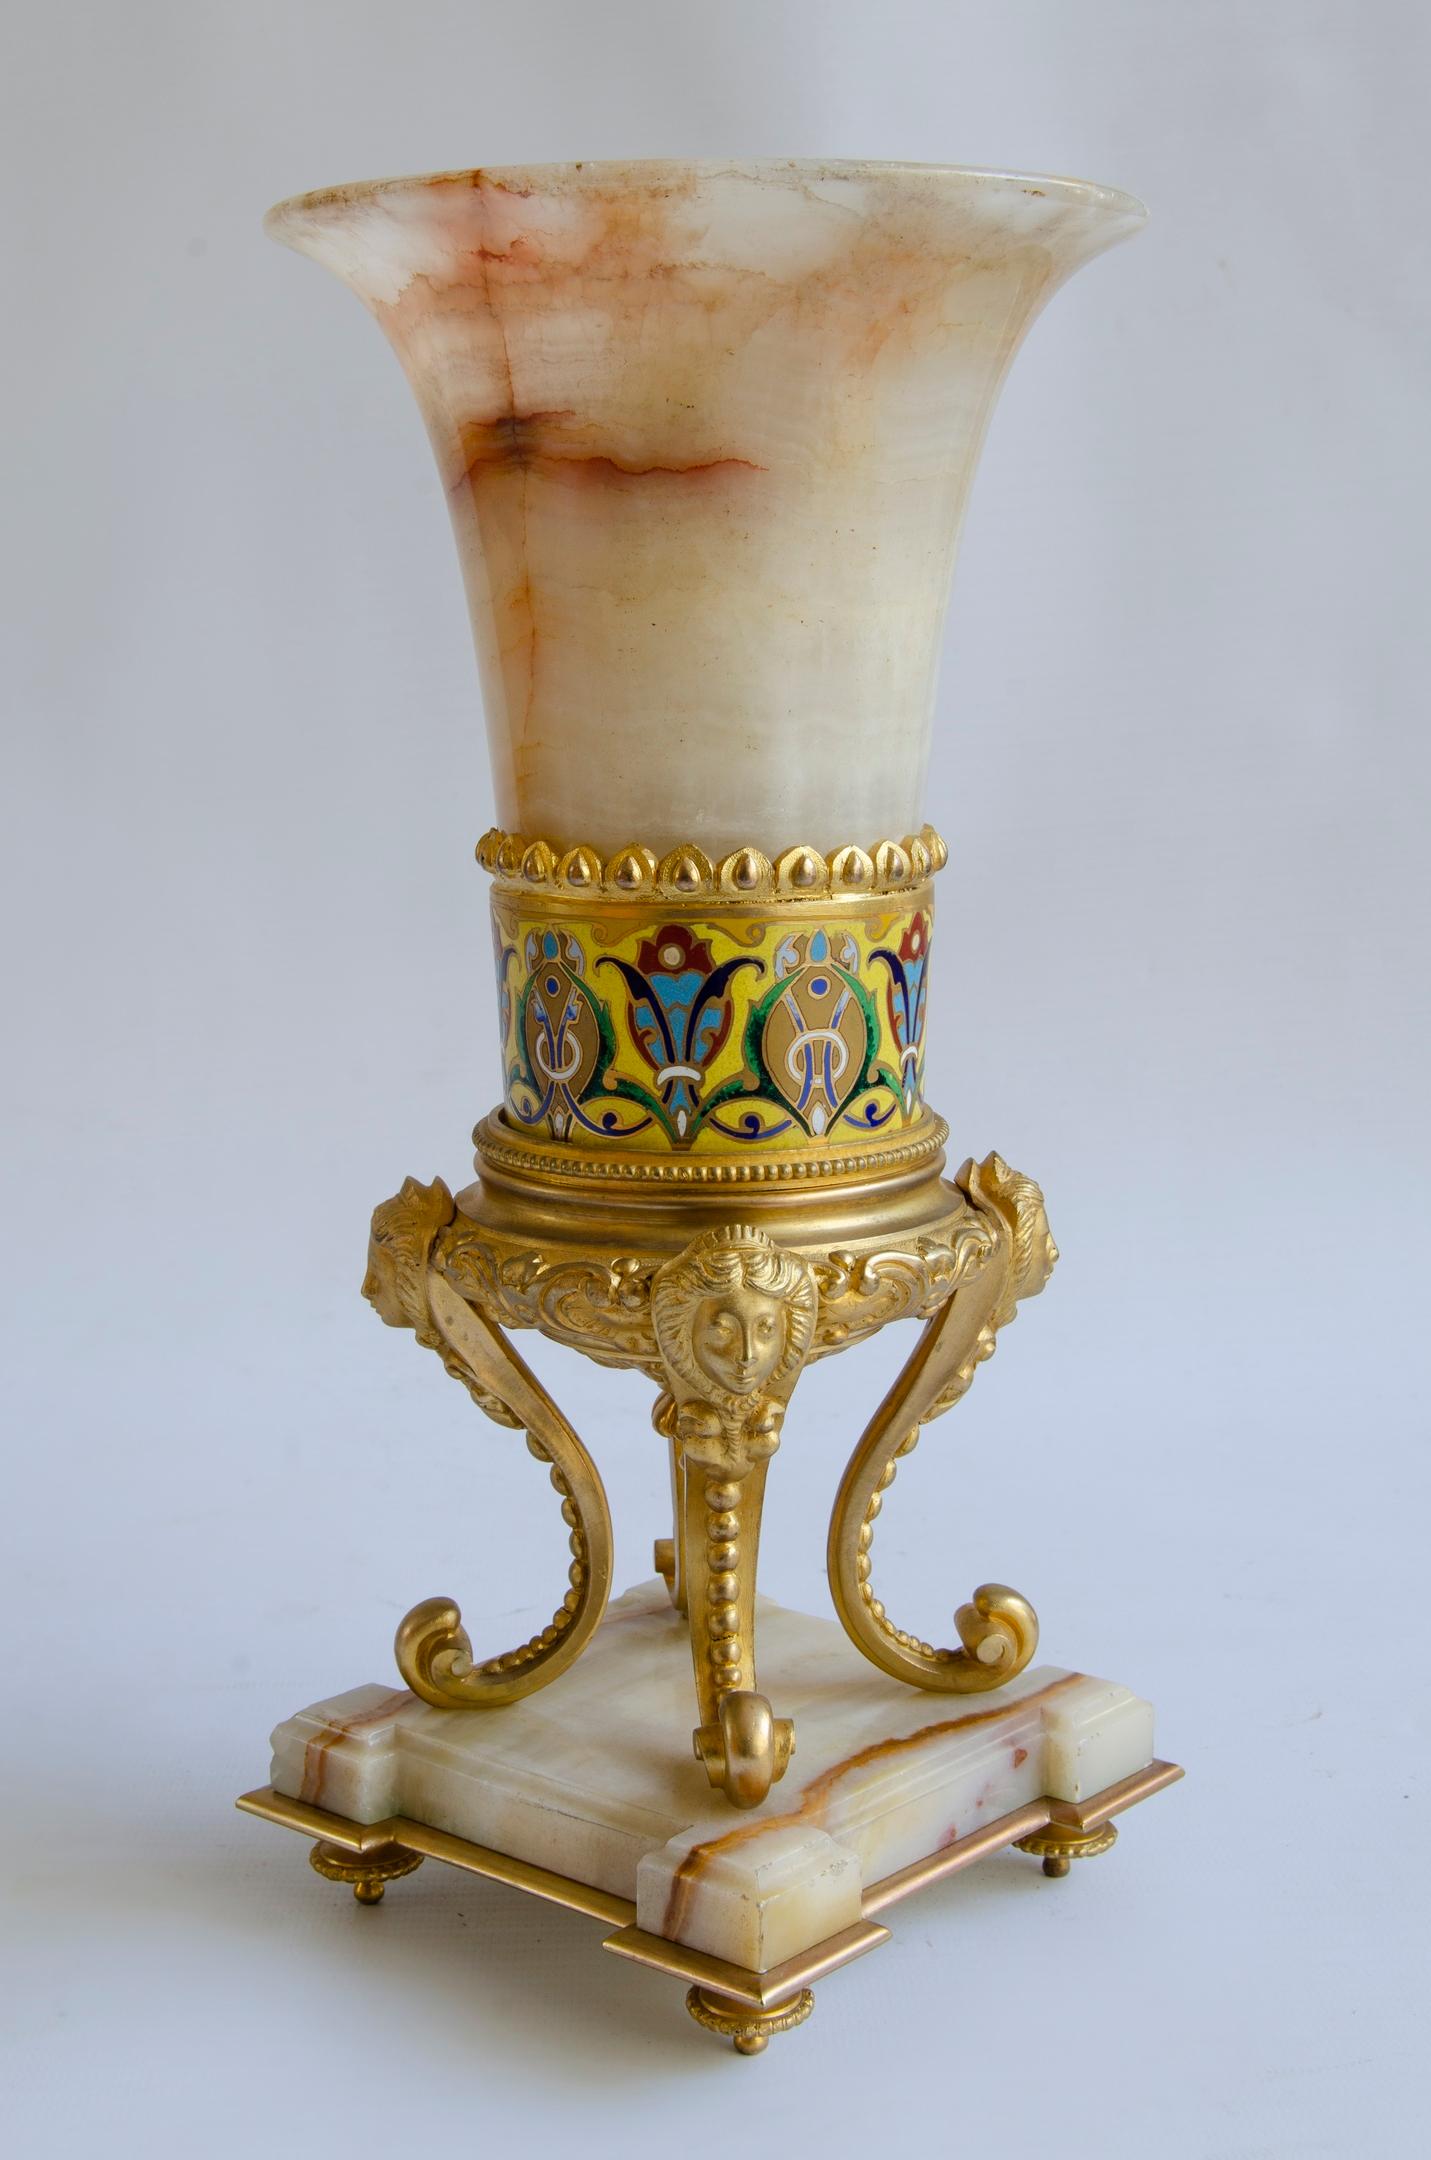 Napoleon III centerpiece
circa 1900 Origin France
Onyx, gilt bronze and chamnpleve enamel
perfect condition.
The Napoleon III style had its heyday during the 1850s and 1880s. Emperor Napoleon wanted to emulate the lavishness and elegance of the